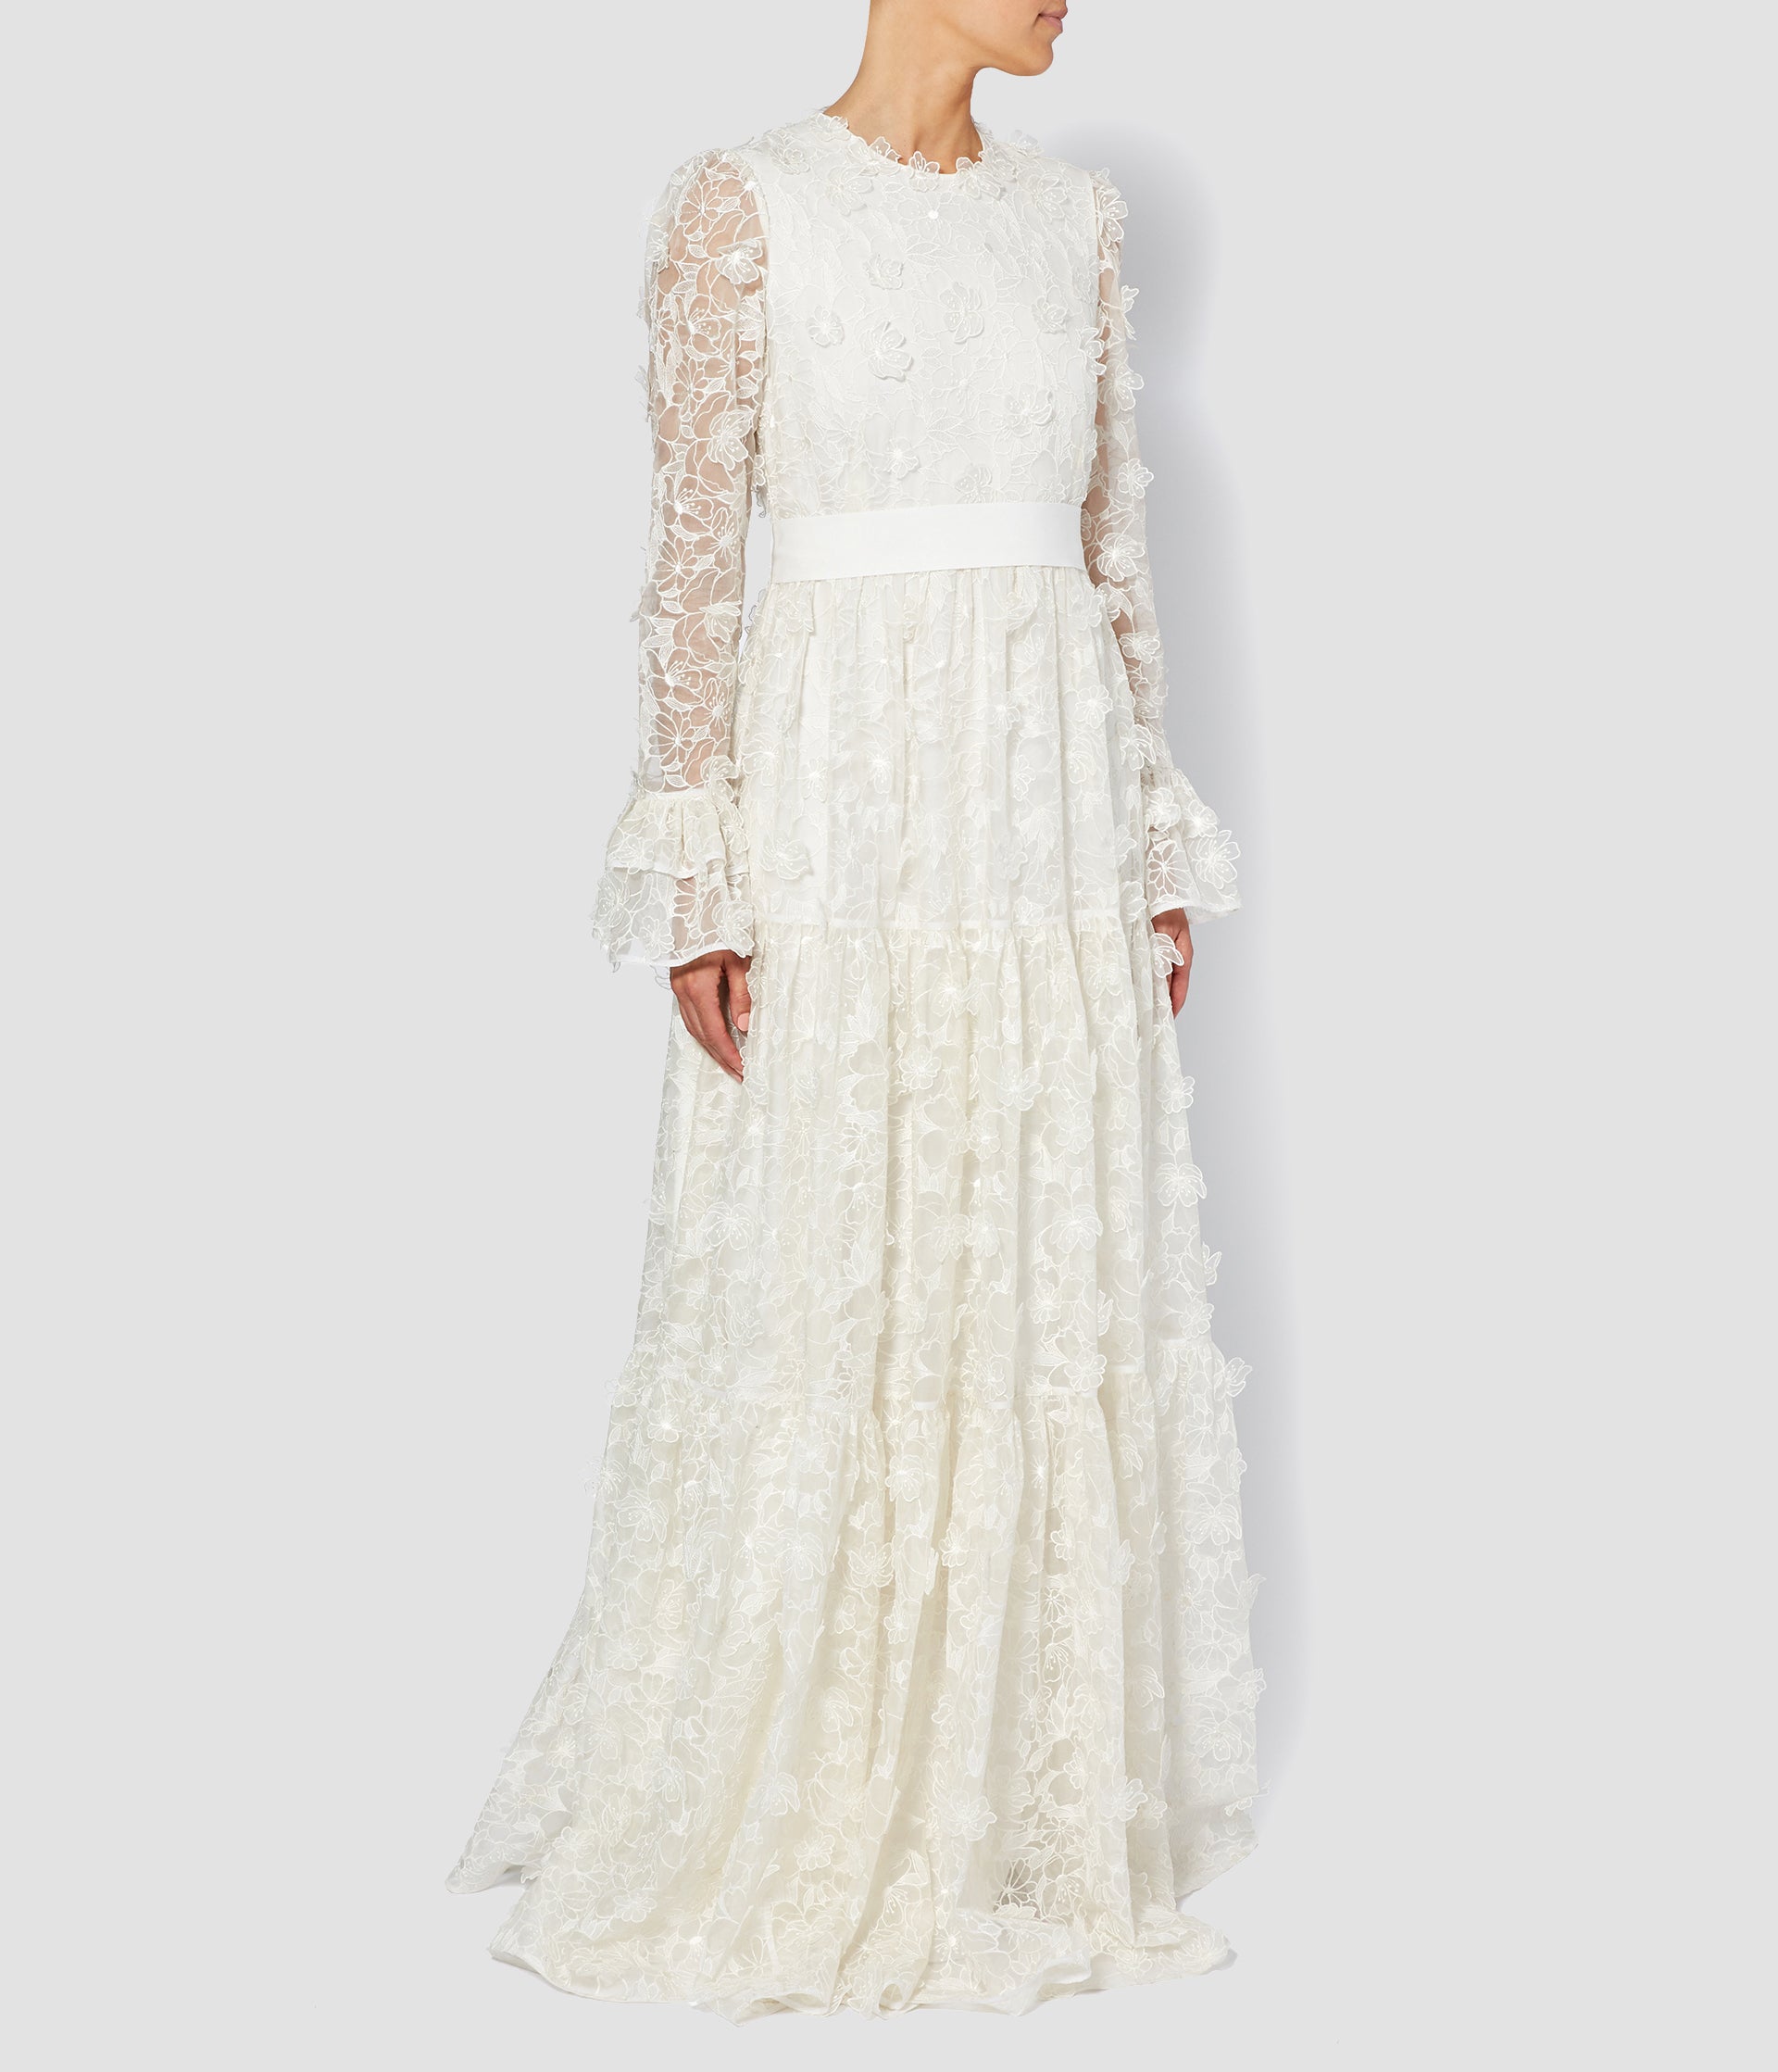 An organza wedding gown in ivory with a floor length skirt and long sleeves. The organza dress features ruffled cuffs and a 3D flower texture. 